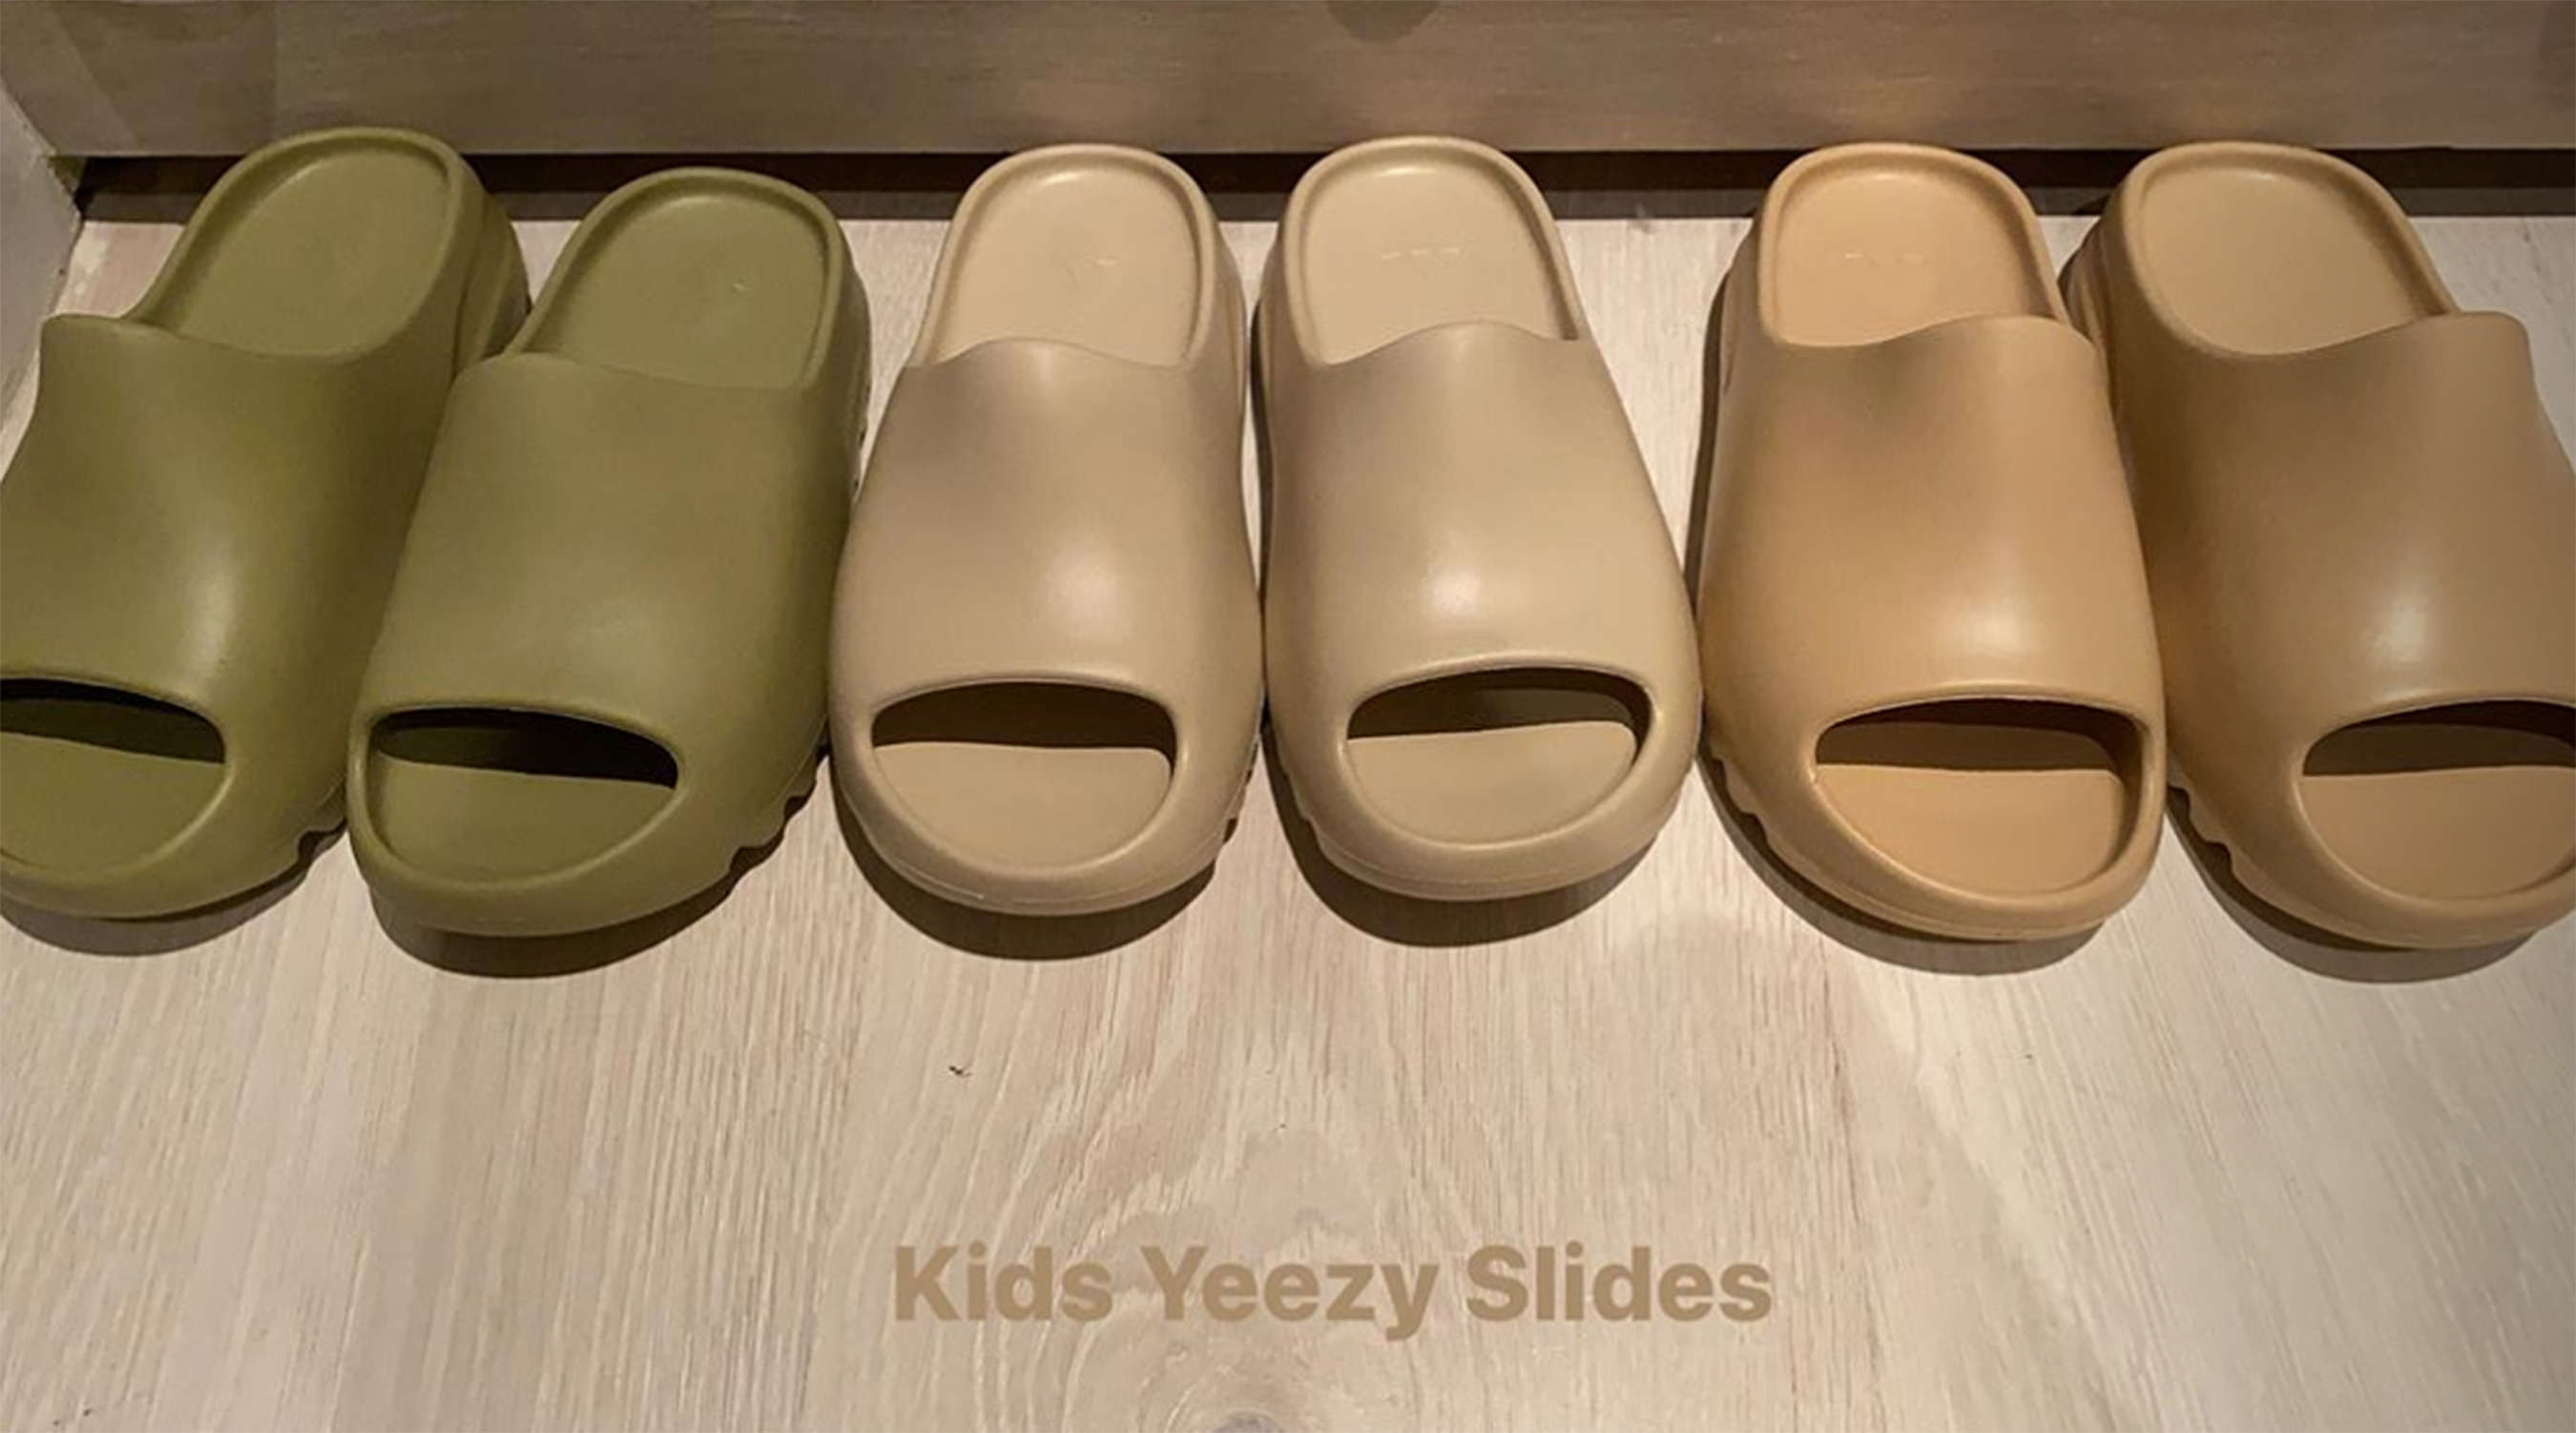 yeezy slides fit true to size